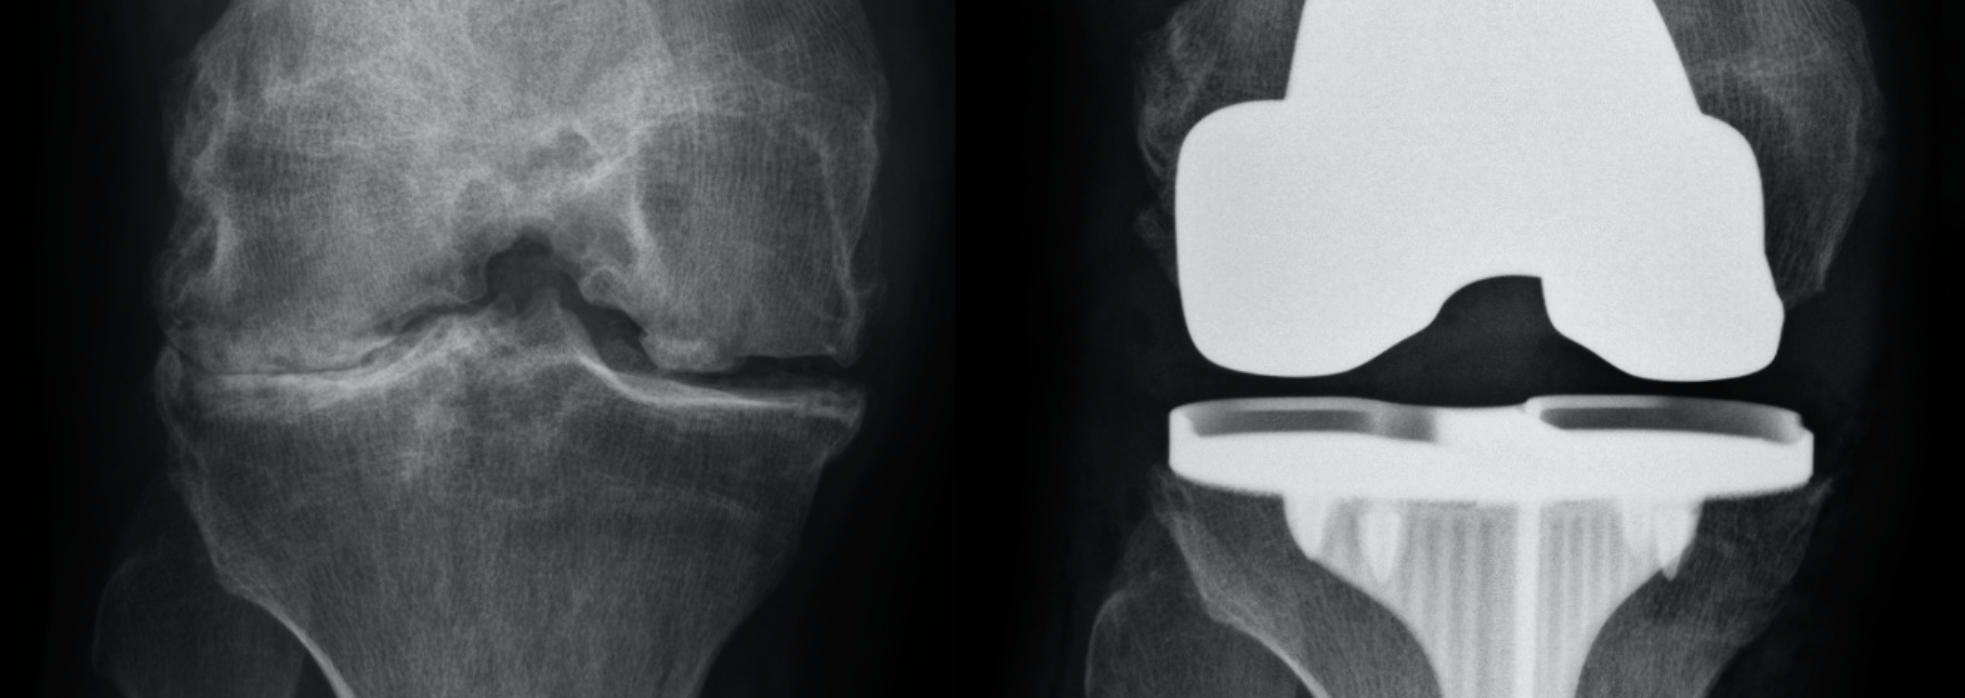 x-rays of a knee joint before and after robotic total knee replacement surgery